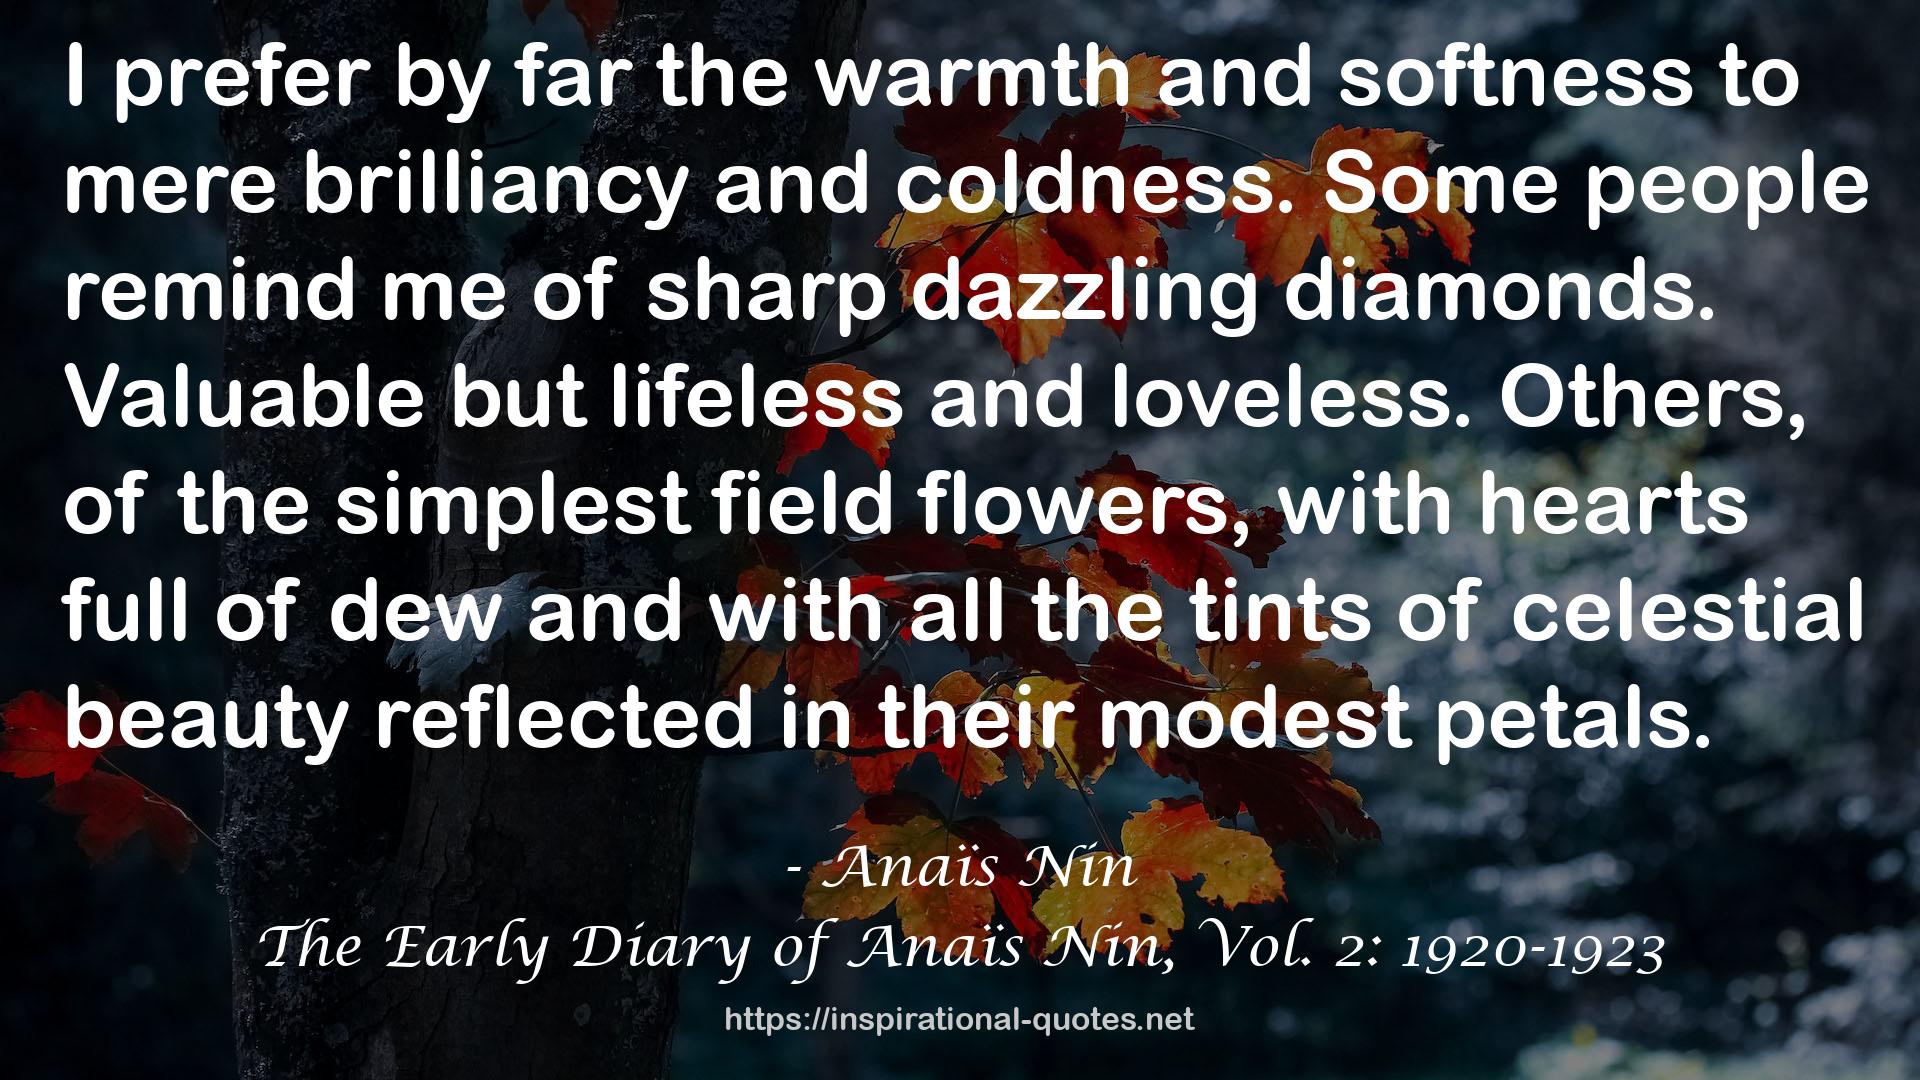 The Early Diary of Anaïs Nin, Vol. 2: 1920-1923 QUOTES